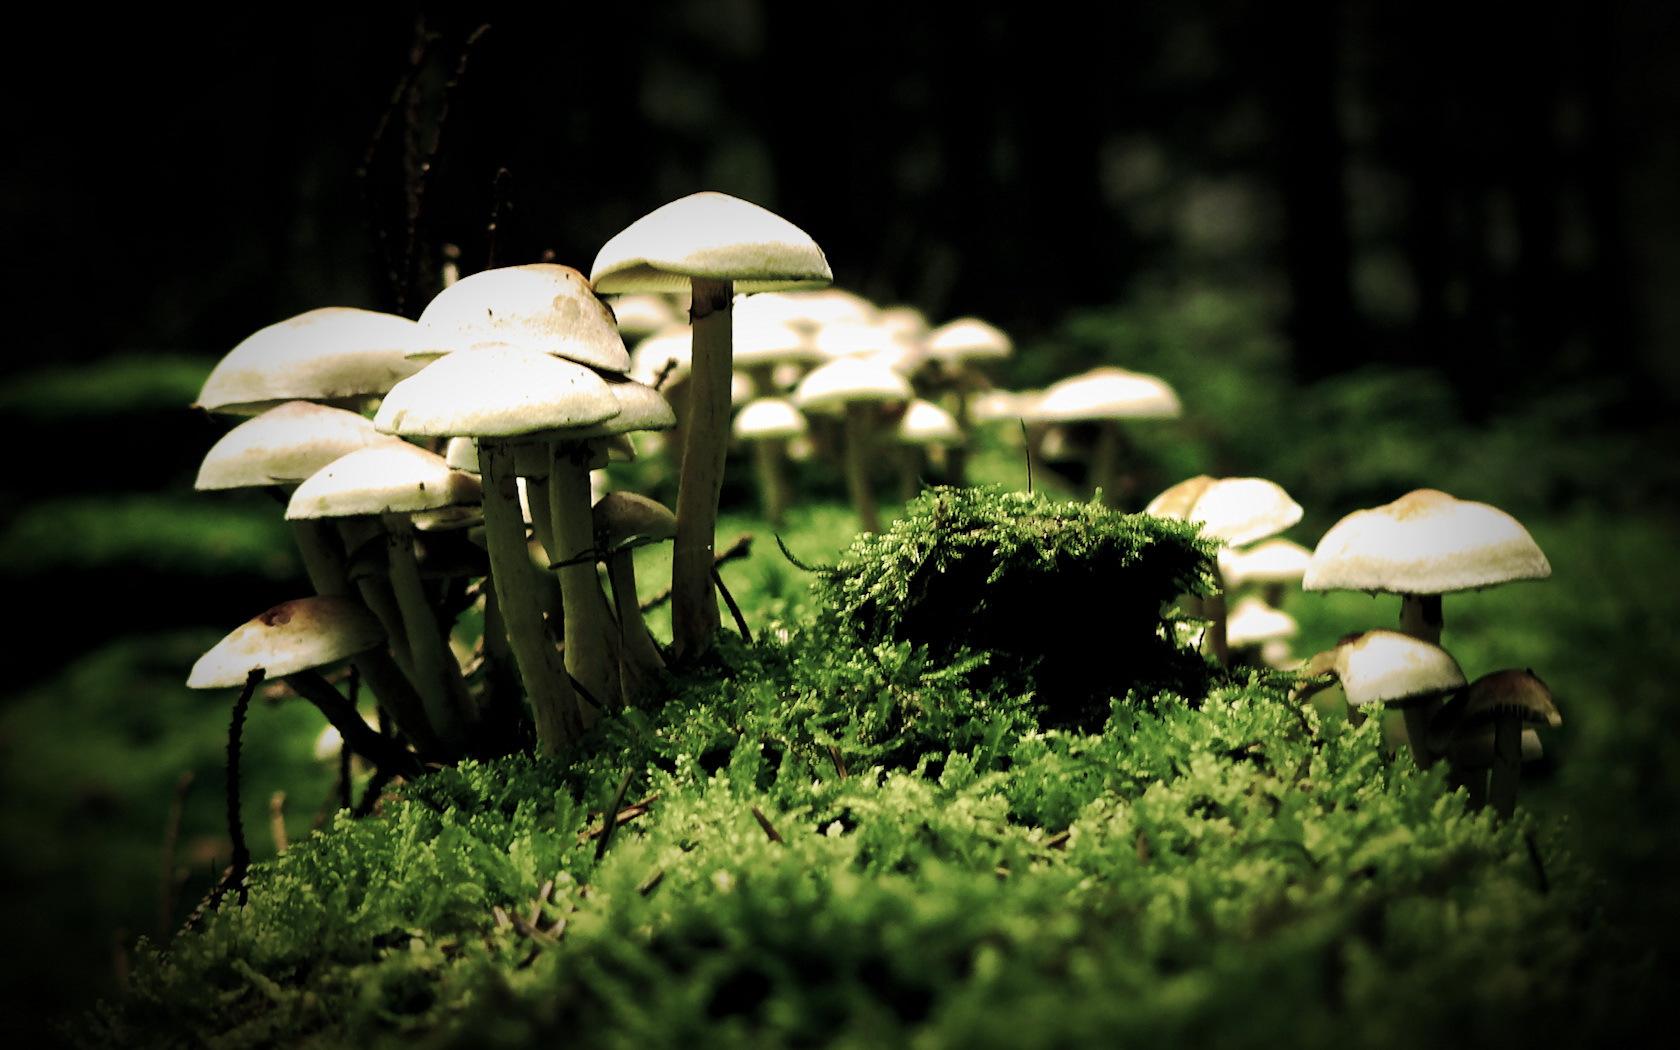 Family of mushrooms on moss wallpaper and image